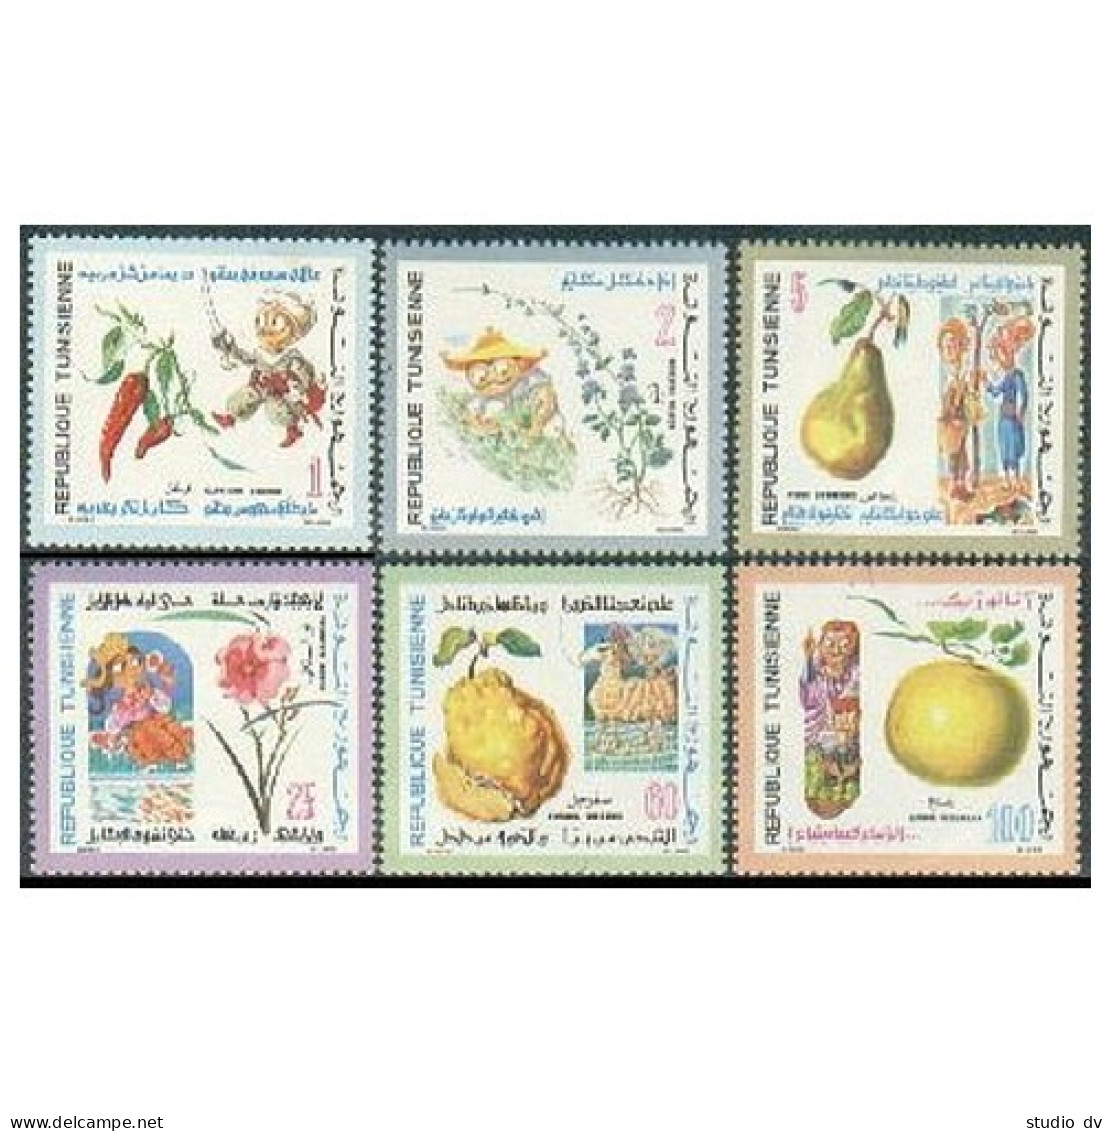 Tunisia 561-566, MNH. Michel 761-766. Fruits, Flowers And Folklore, 1971. - Tunisie (1956-...)